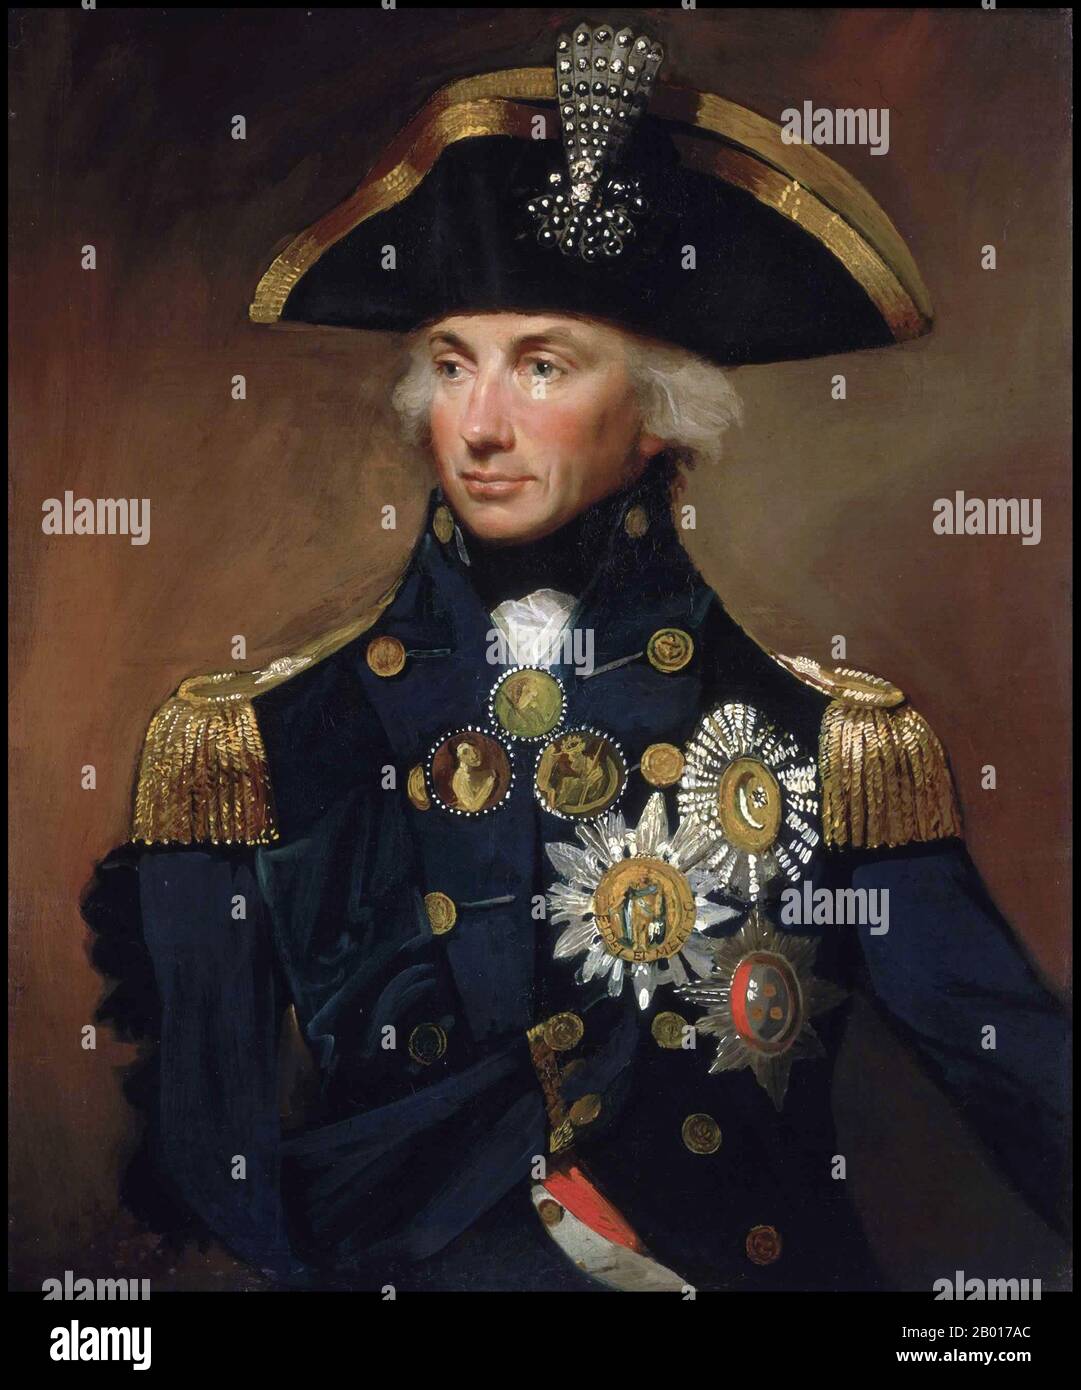 England: 'Rear-Admiral Sir Horatio Nelson, 1758-1805'. Oil on canvas painting by Lemuel Francis Abbott (1760-1802), 1799.  Horatio Nelson, 1st Viscount Nelson, 1st Duke of Bronté, KB (29 September 1758 – 21 October 1805) was an English flag officer famous for his service in the Royal Navy, particularly during the Napoleonic Wars. He was noted for his inspirational leadership and having a superb grasp of strategy and unconventional tactics, which resulted in a number of decisive naval victories. He was wounded several times in combat, losing one arm and the sight in one eye. Stock Photo